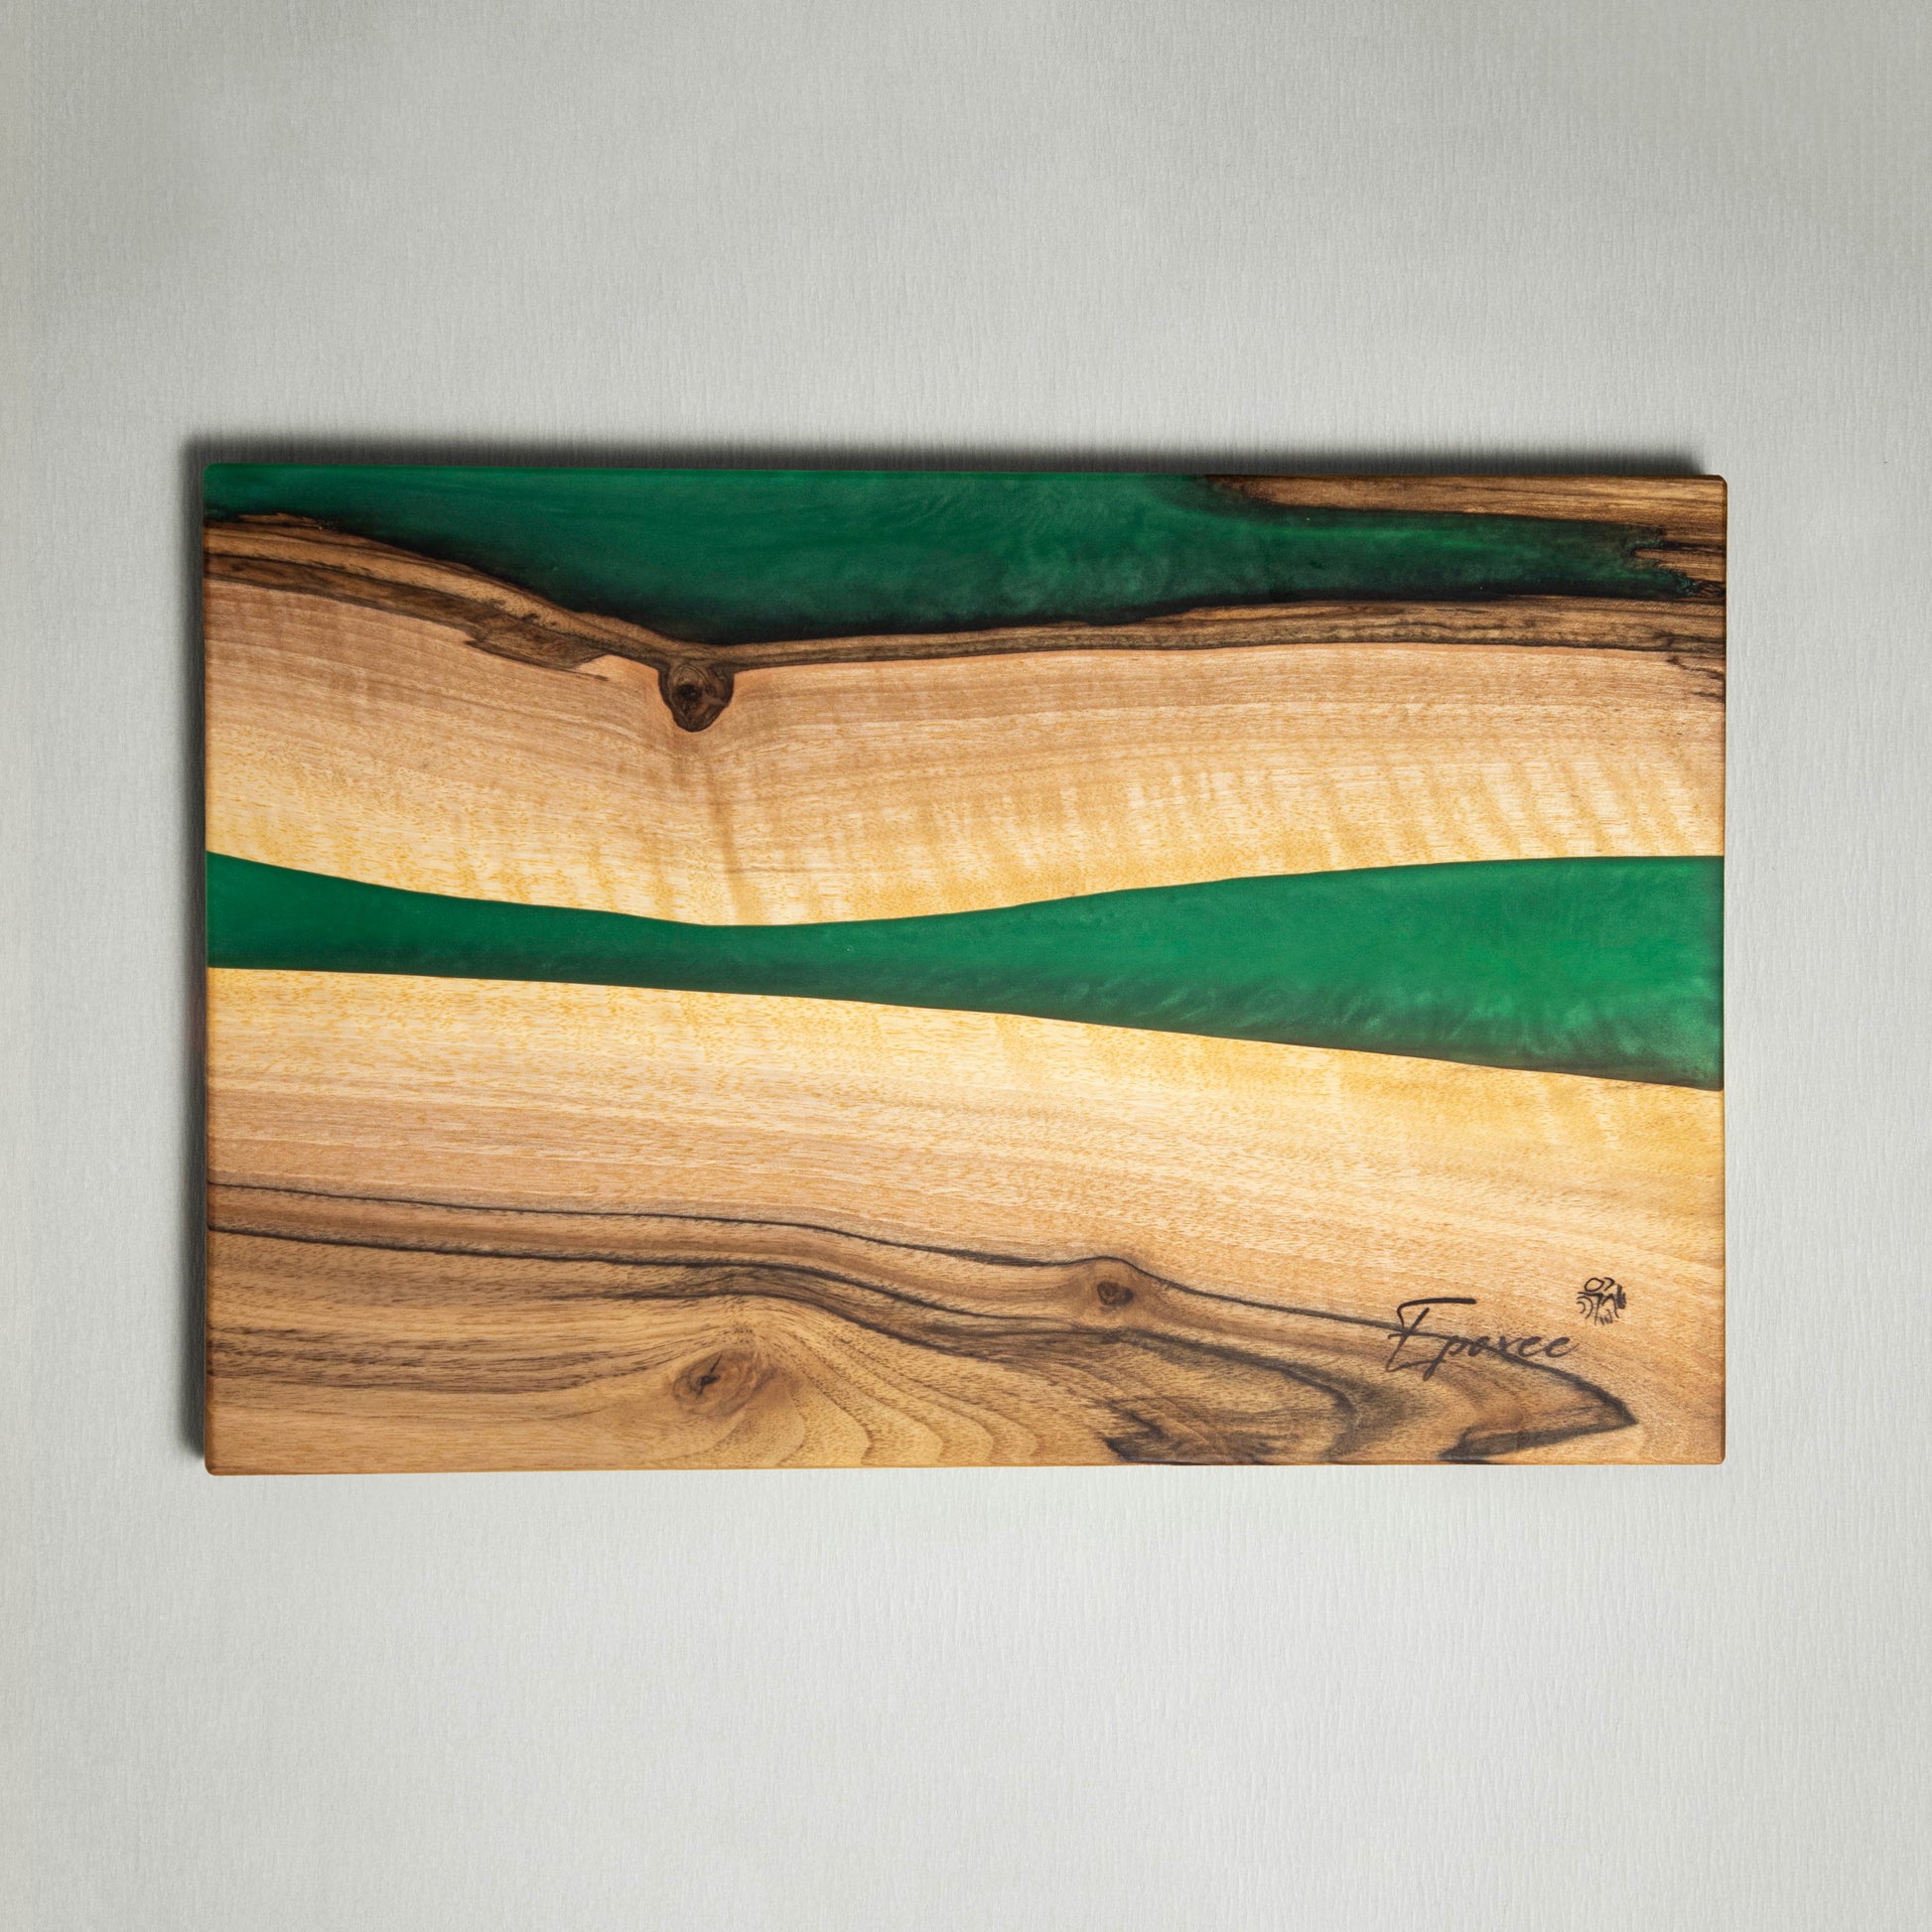 Serving board made from wood and epoxy resin in the color emerald green